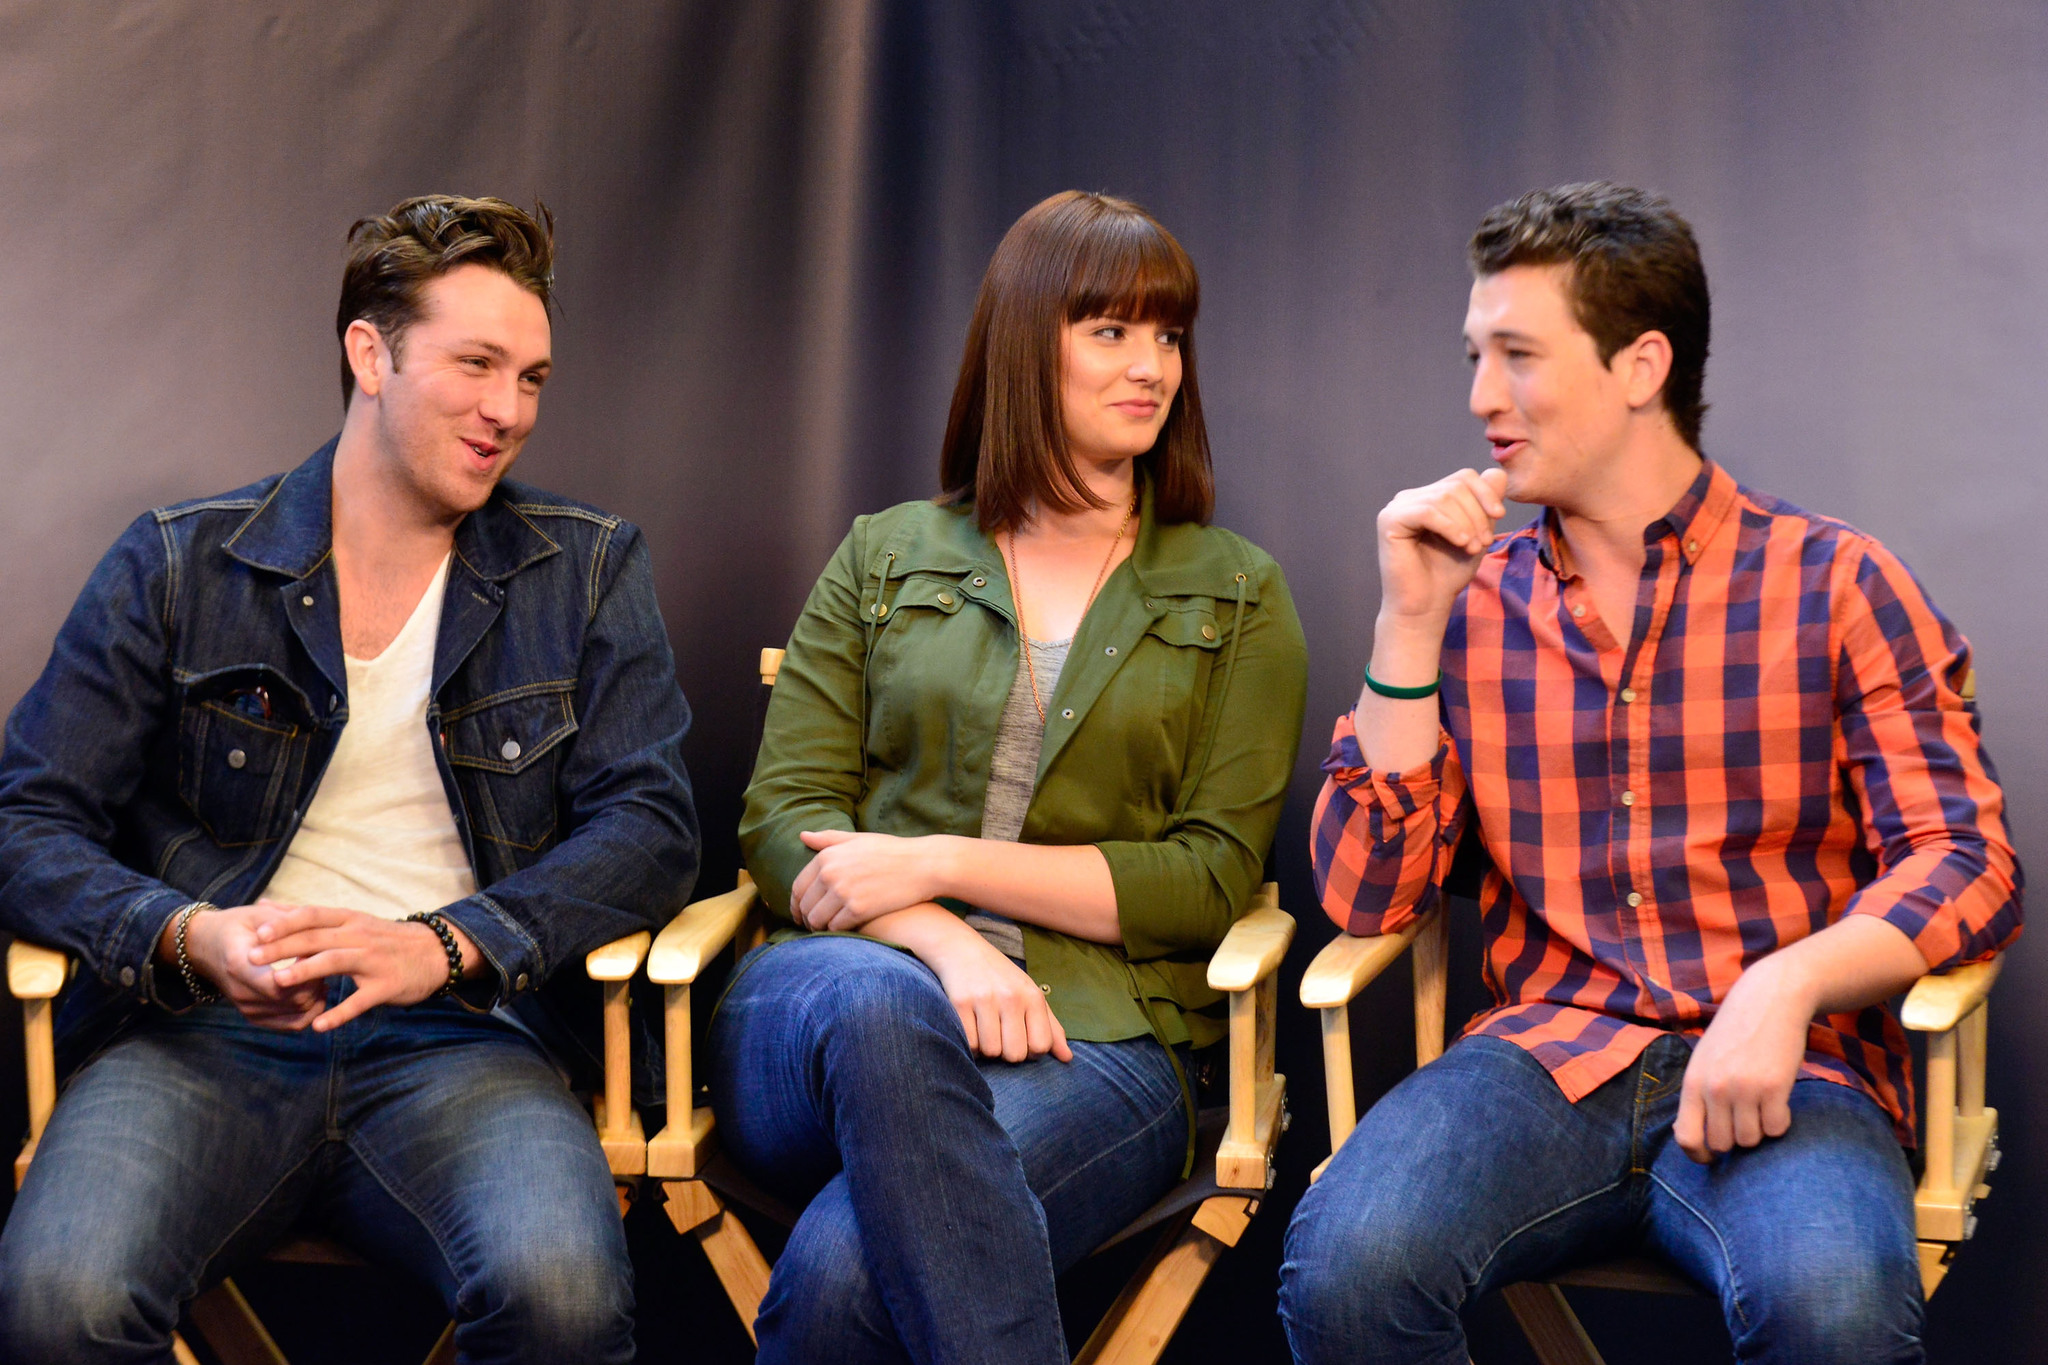 Christian Madsen, Miles Teller and Amy Newbold at event of Divergente (2014)